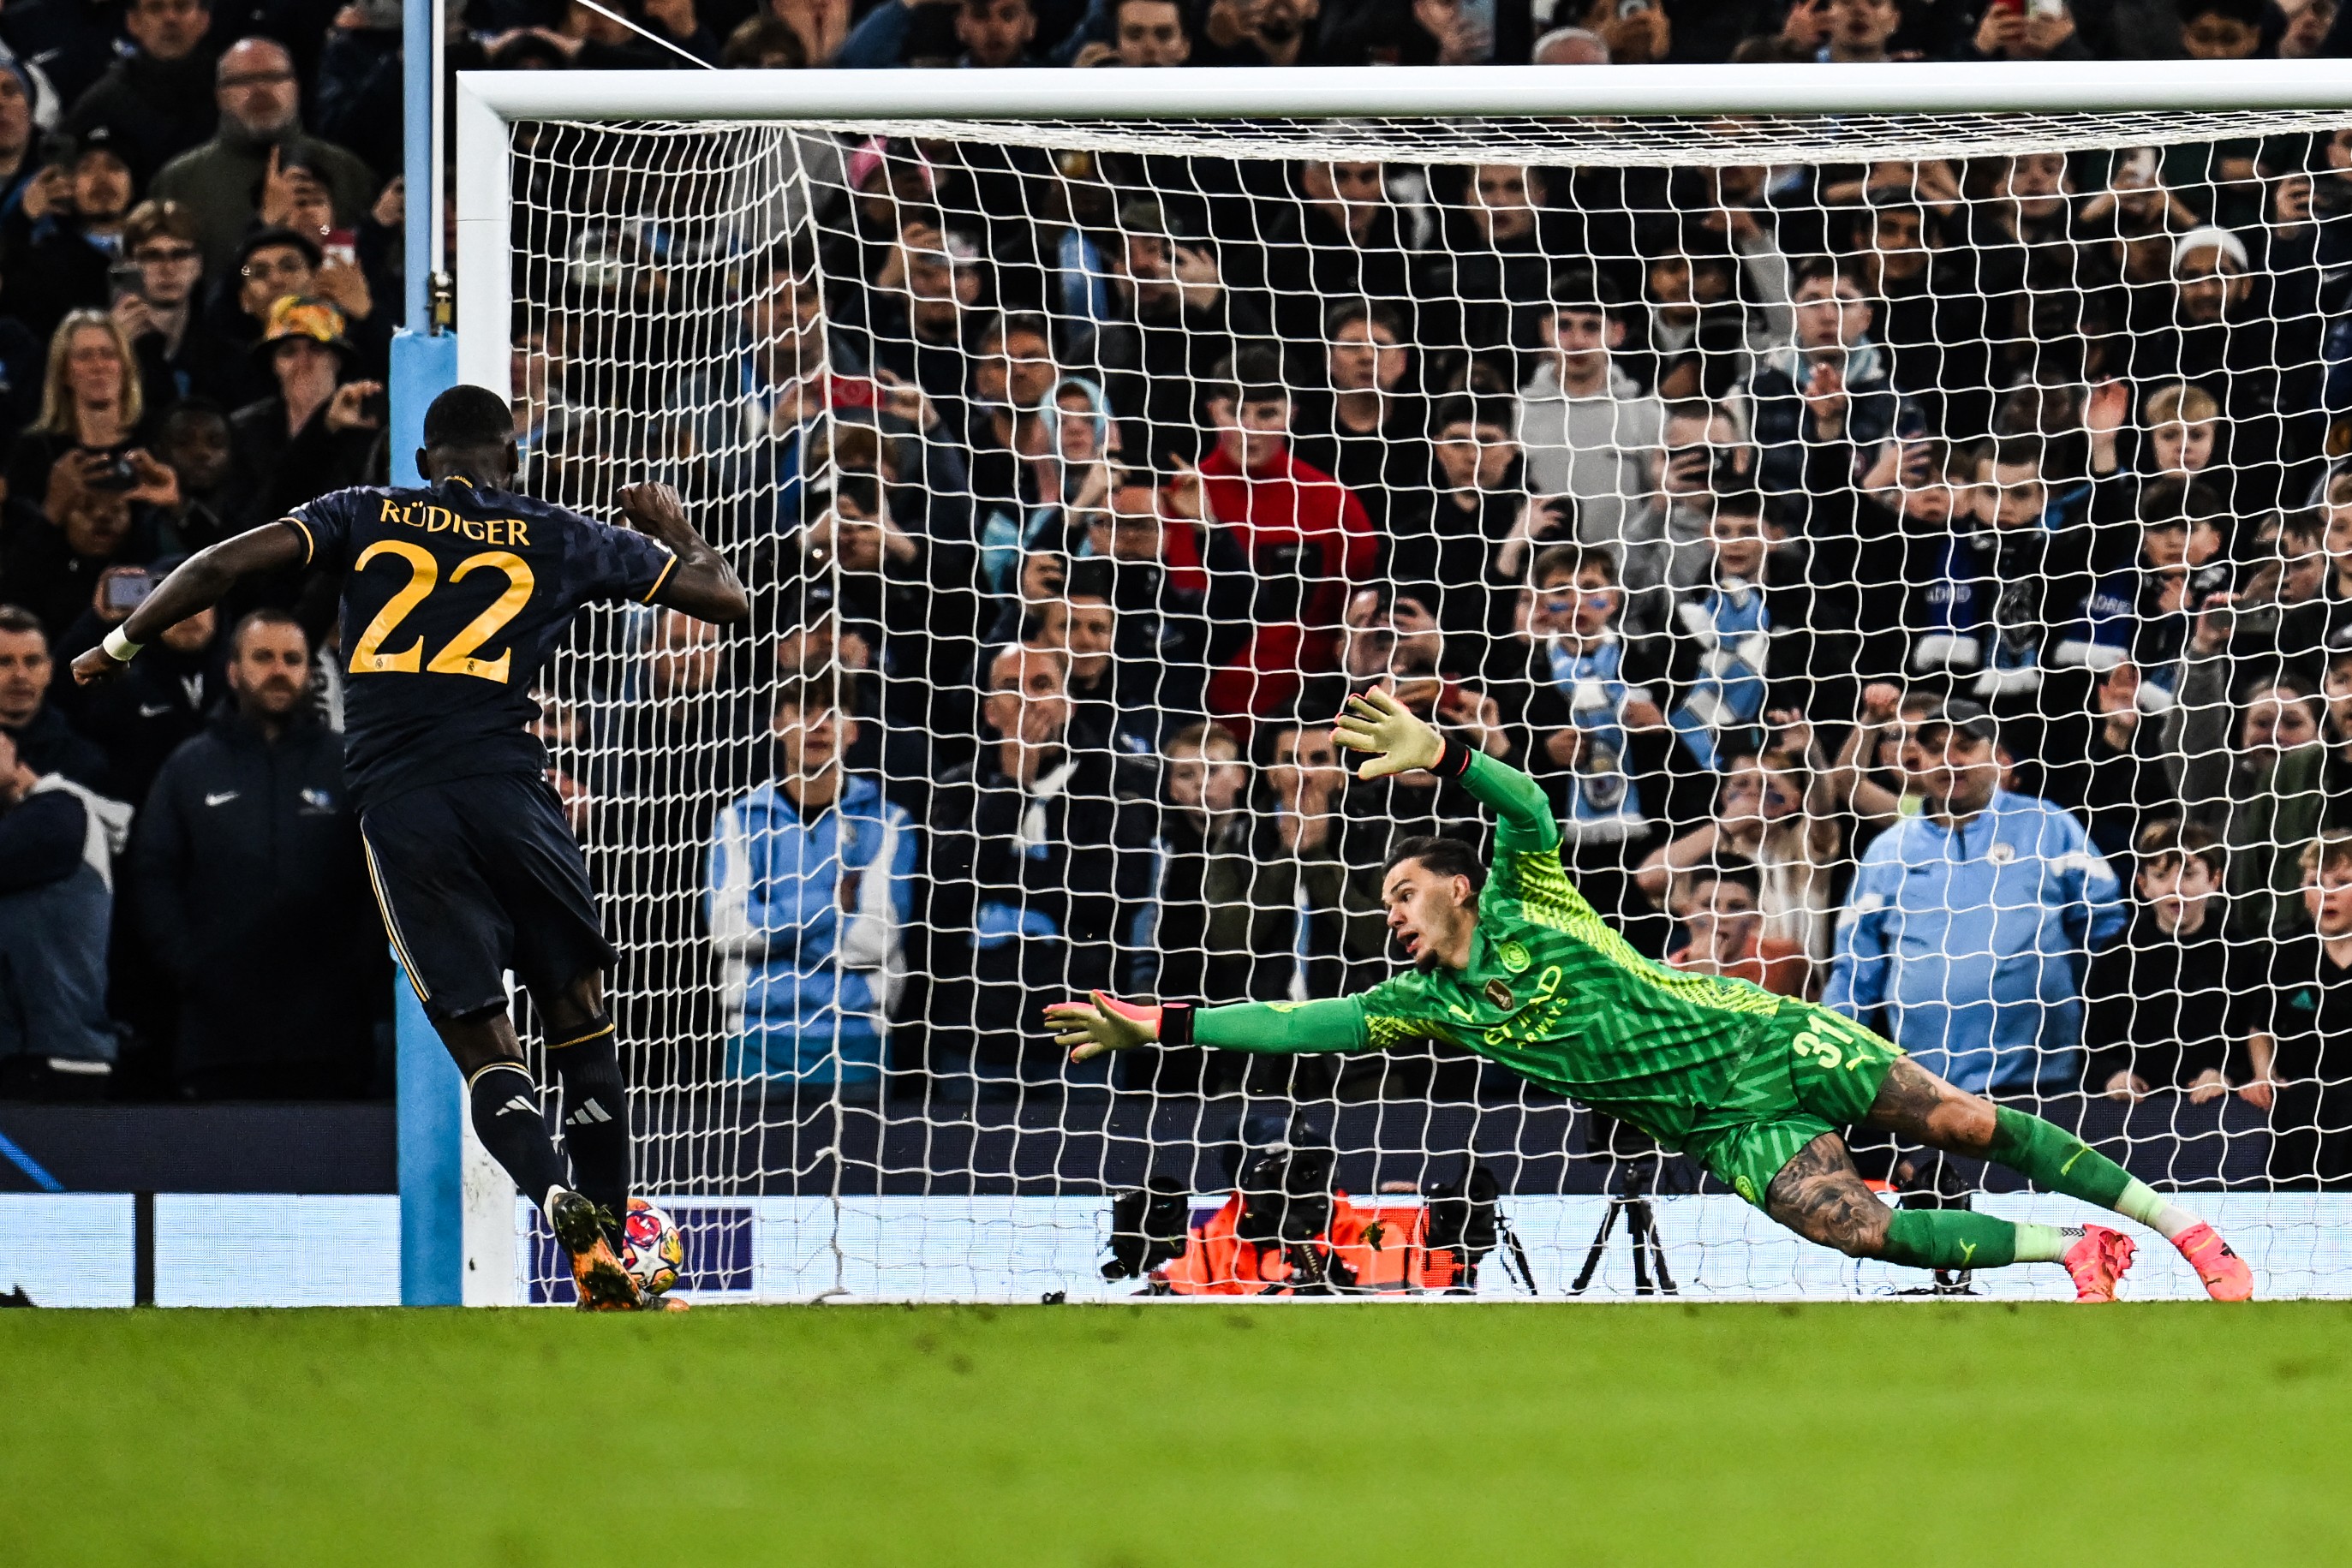 De Bruyne shines but Man City’s missed penalties by Silva and Kovacic cost them dearly